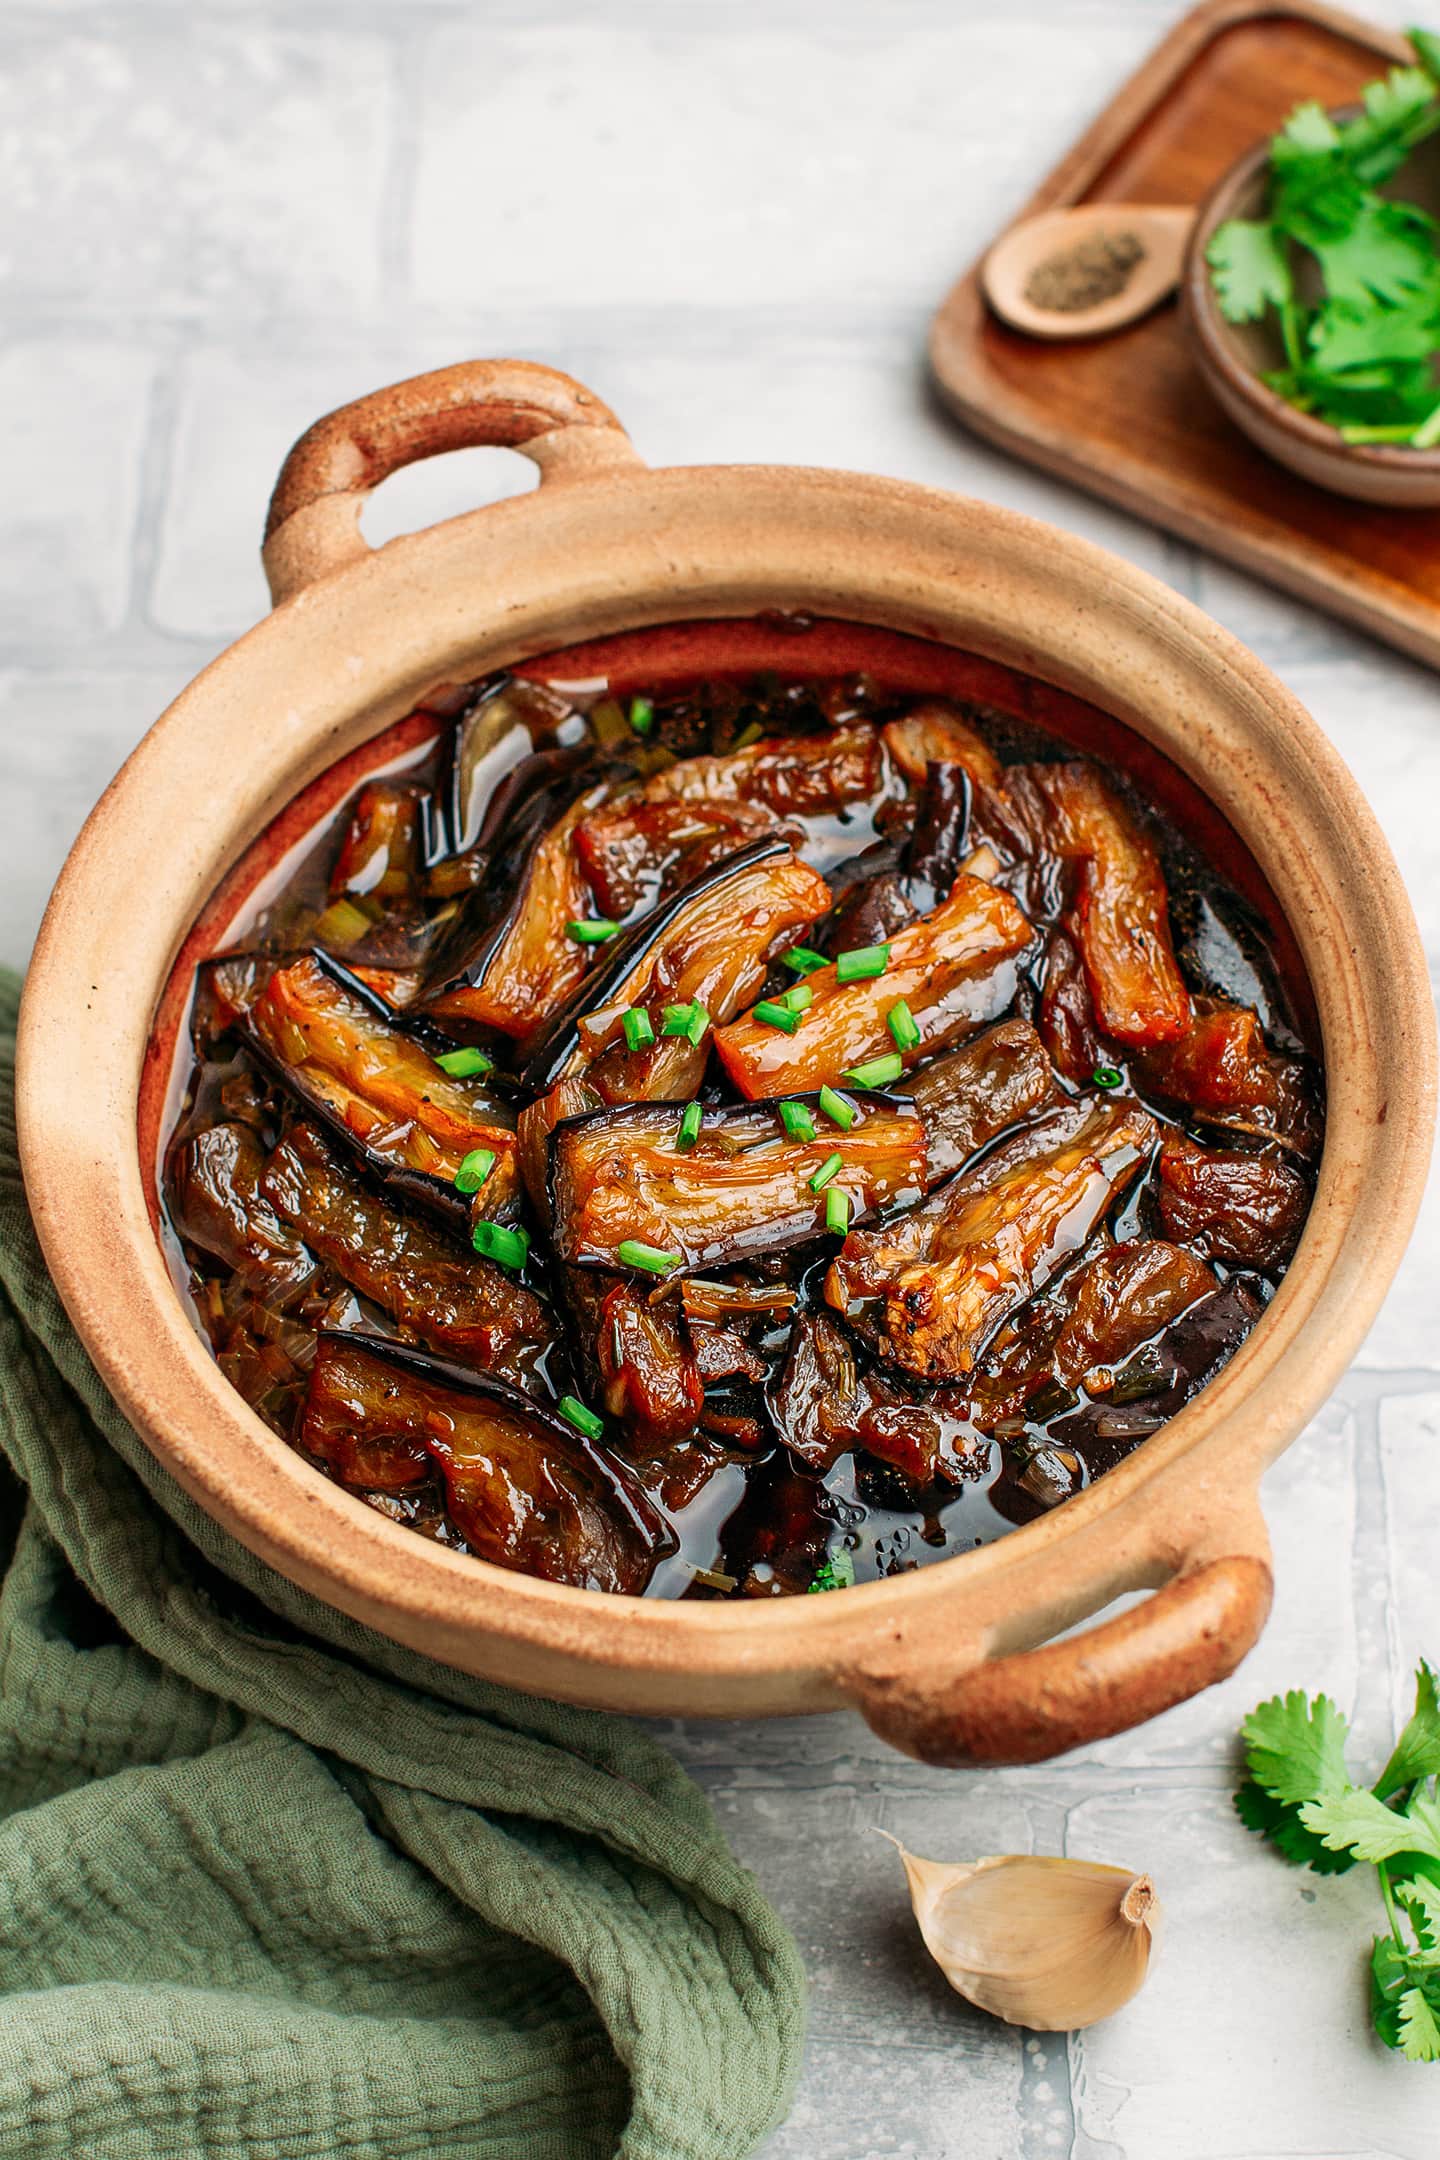 Braised eggplants in a clay pot.